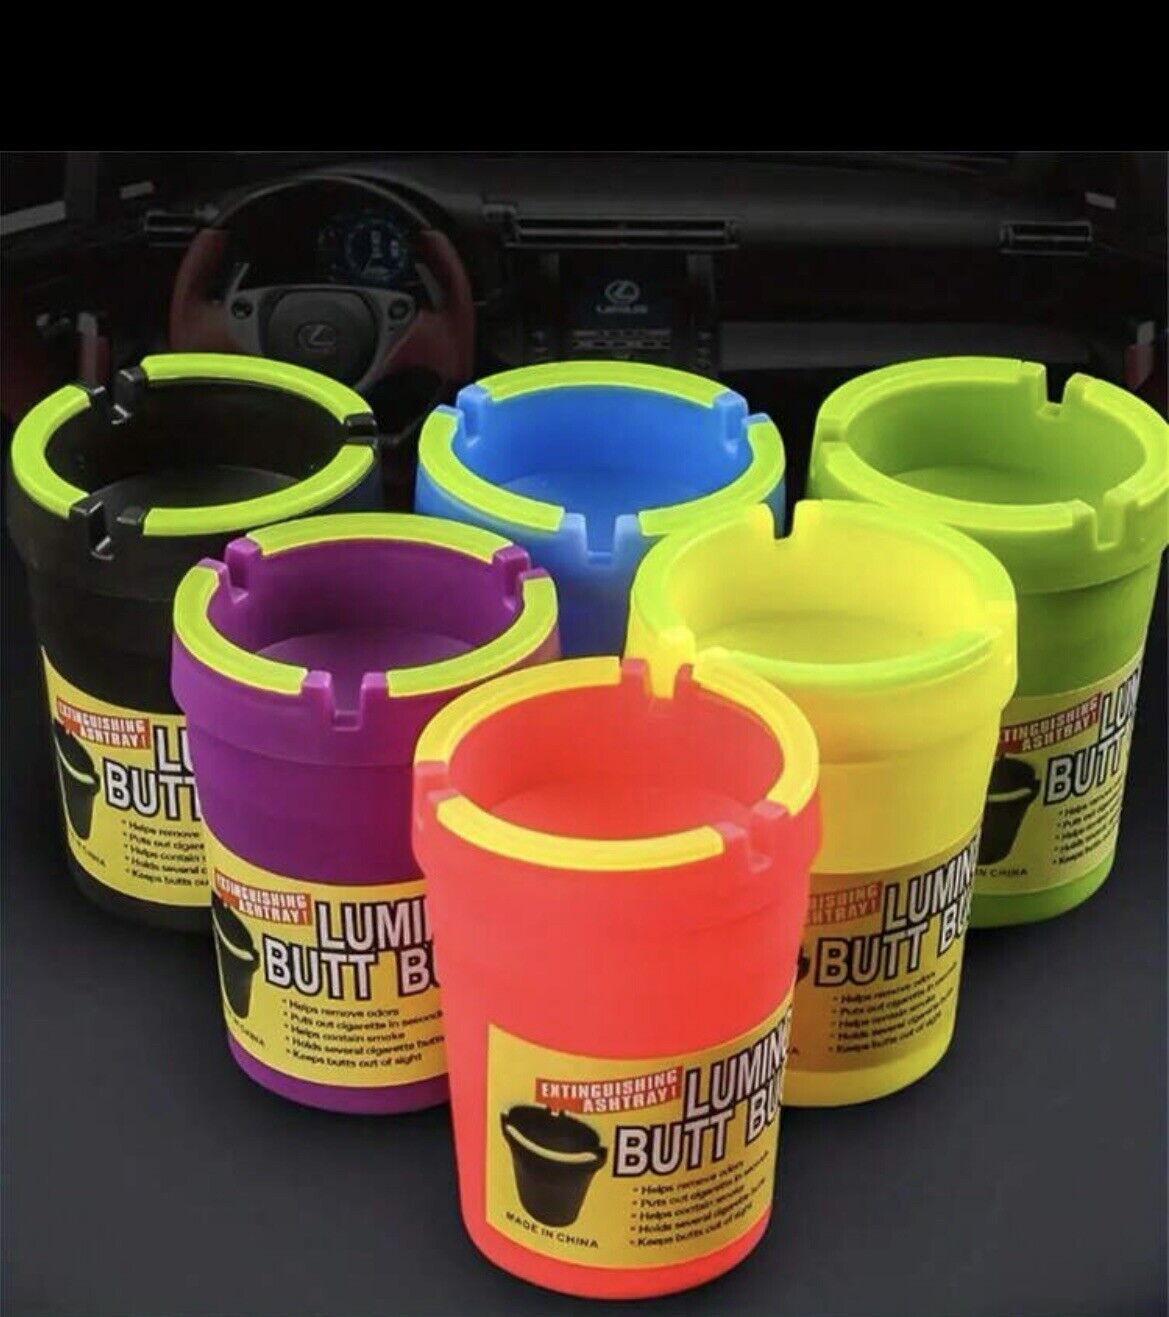 1pc Glow In The Dark Car Ashtray Cigarette Self-Extinguishing Cup Car